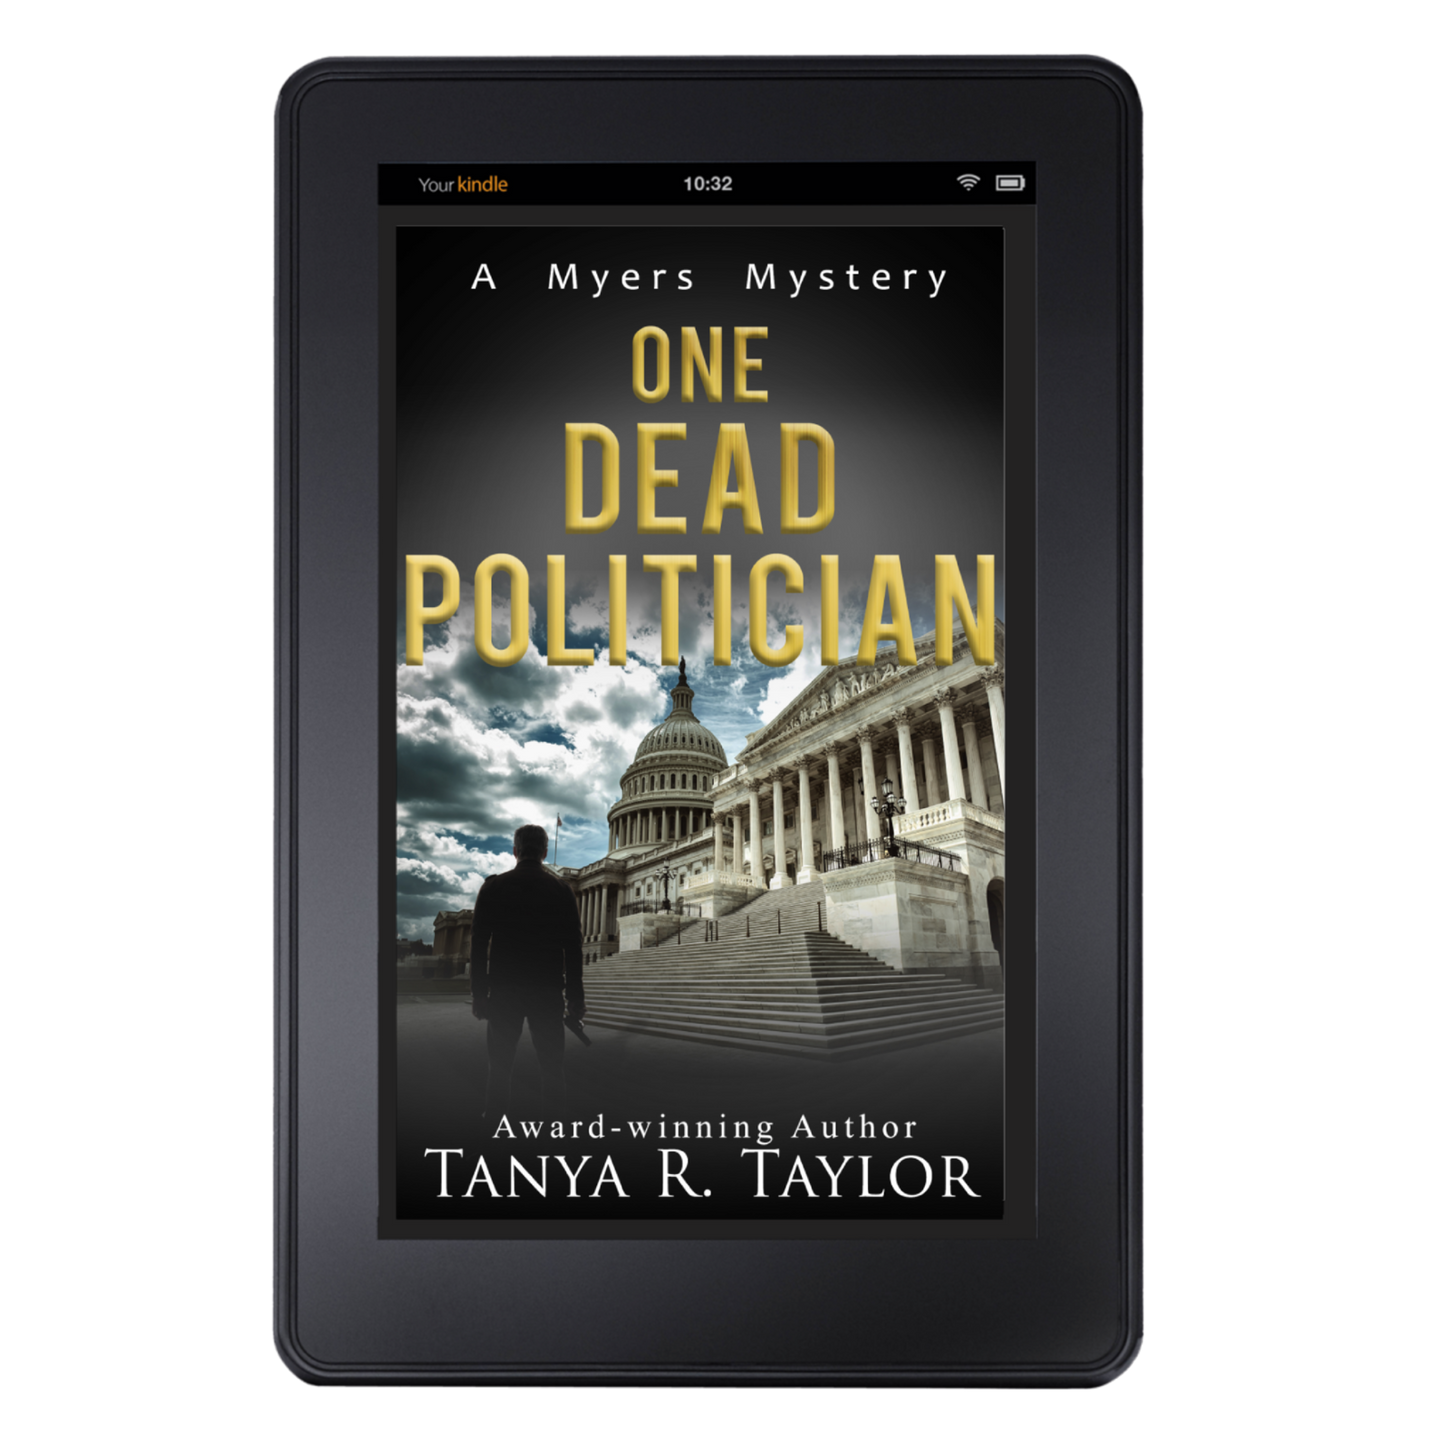 (Ebook) ONE DEAD POLITICIAN (The Myers Mysteries) Book 2